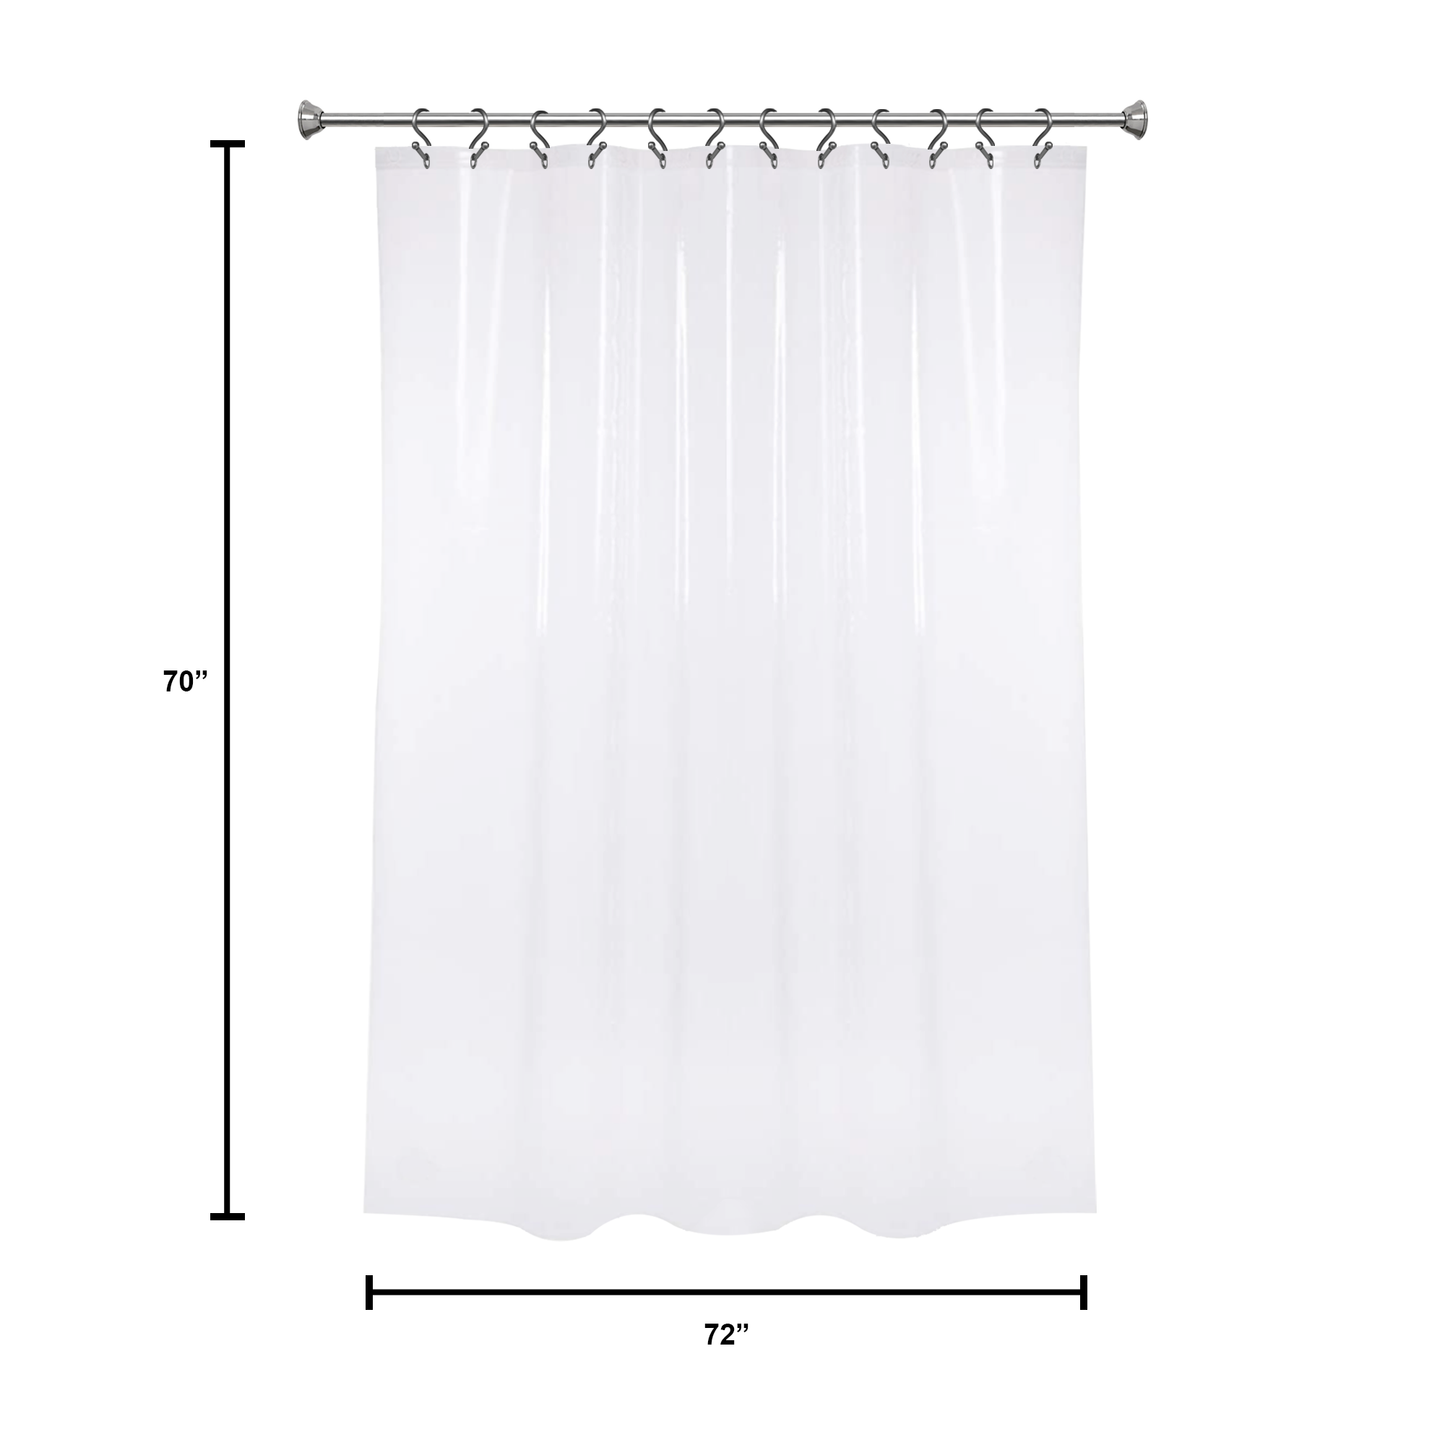 Super Heavy Weight PEVA Shower Liner 70" X 72" - CLEAR